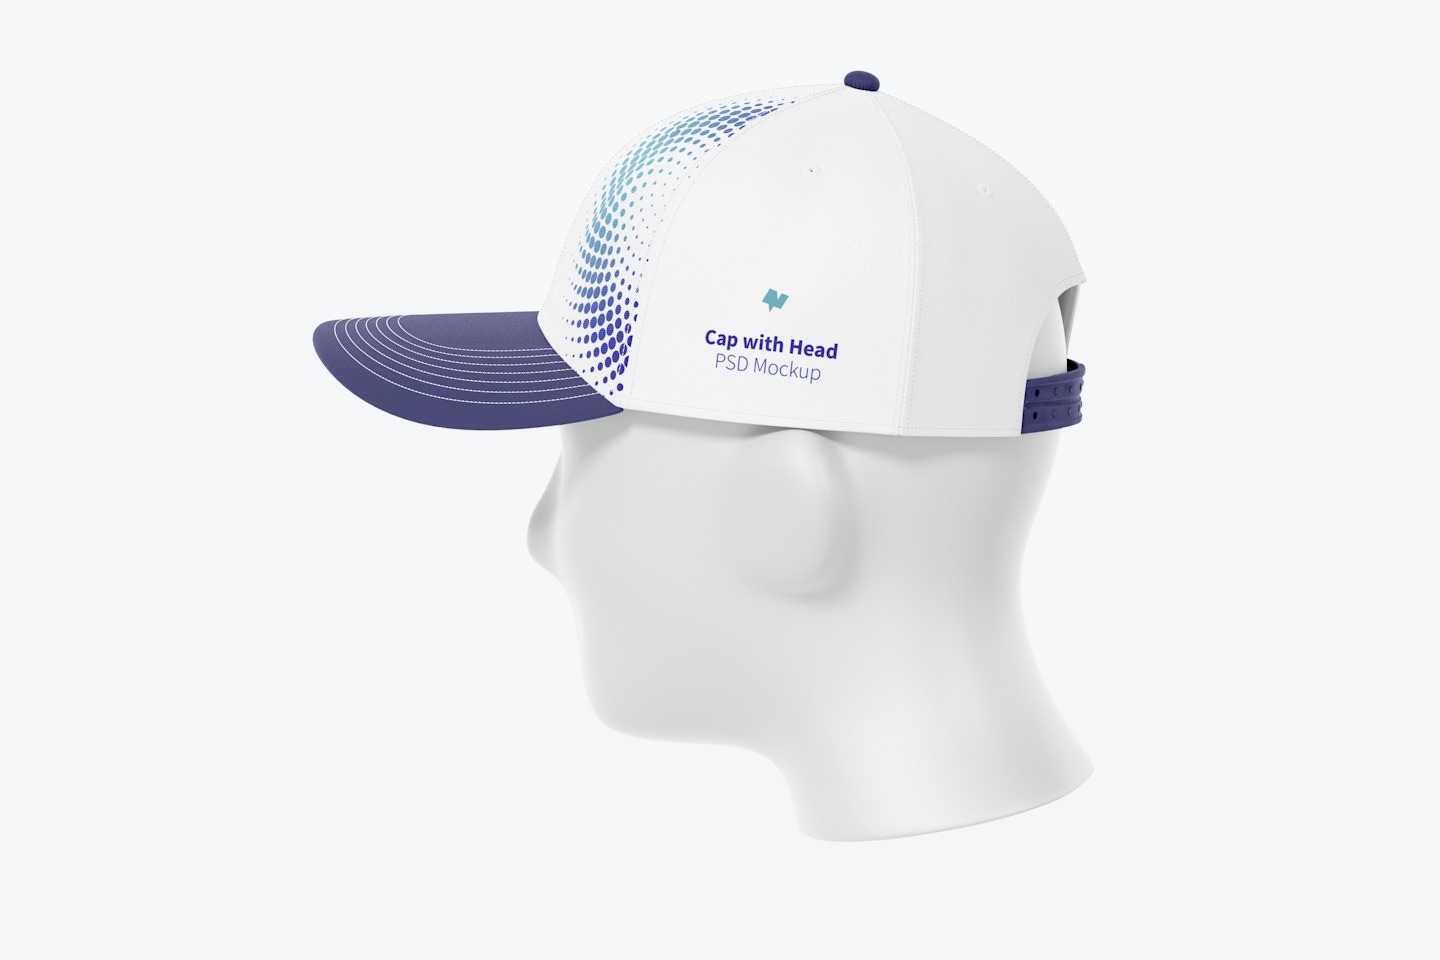 Cap with Head Mockup, Right View